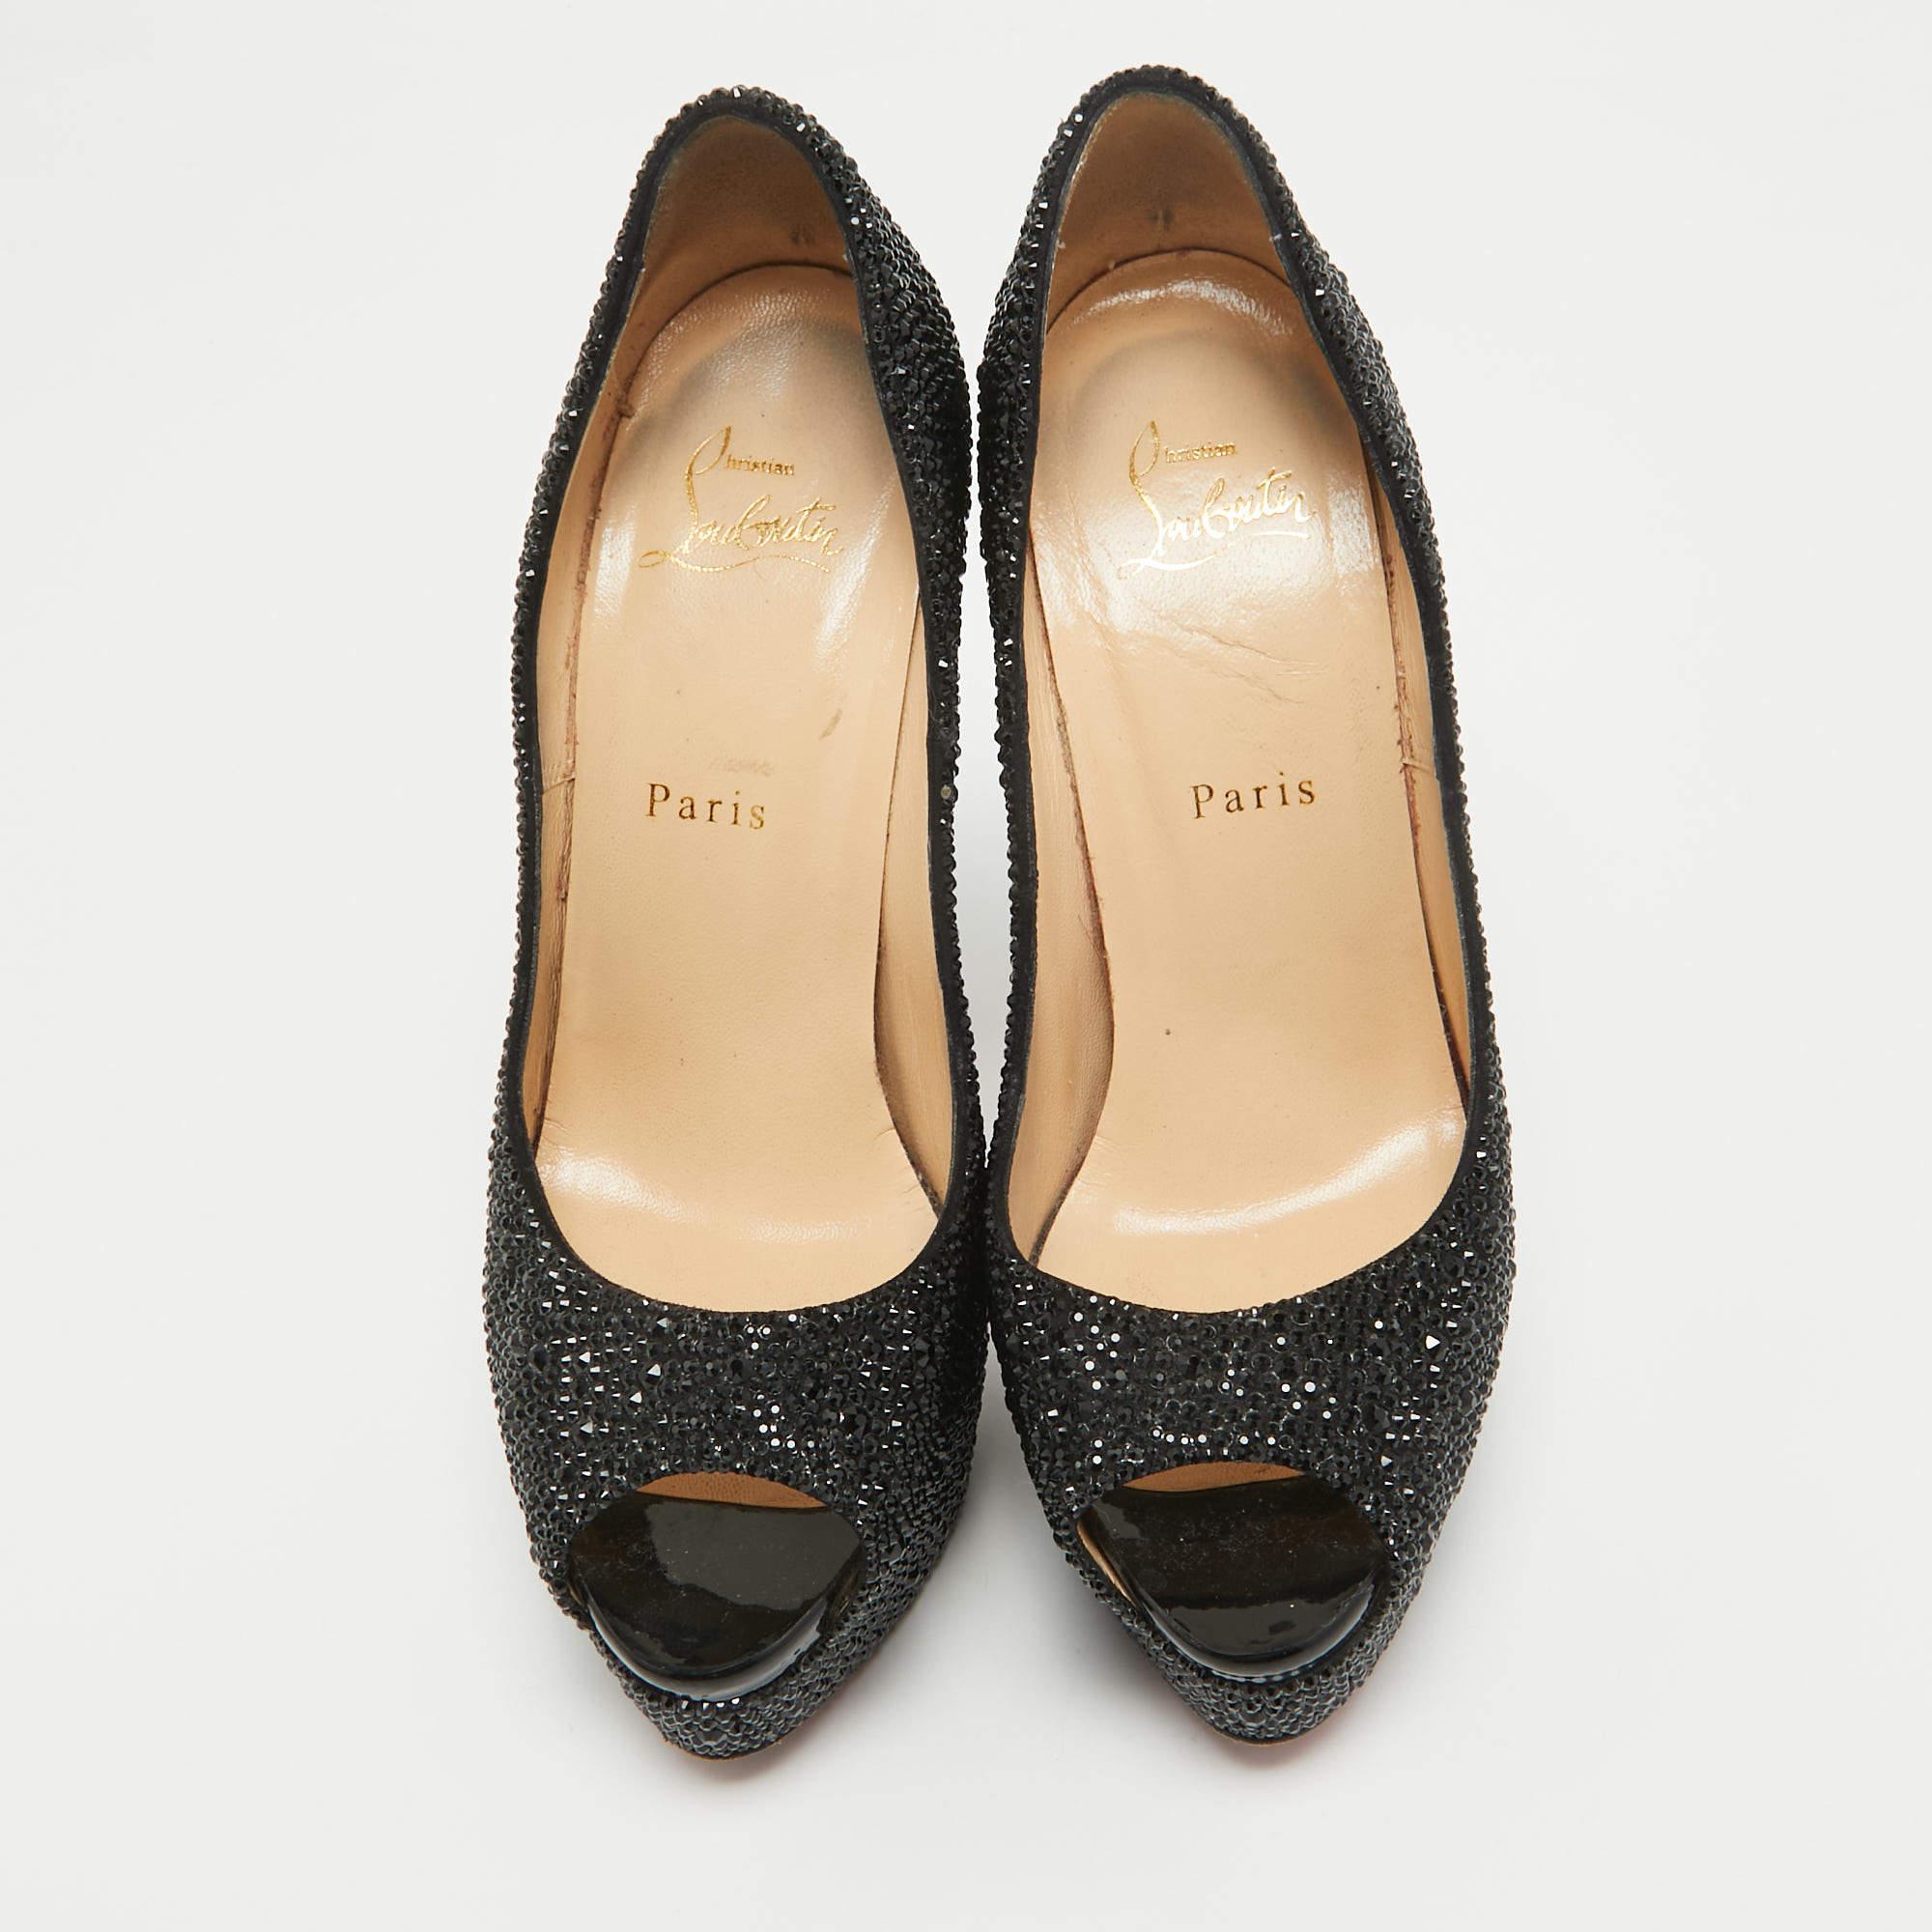 Make a chic style statement with these designer pumps. They showcase sturdy heels and durable soles, perfect for your fashionable outings!

